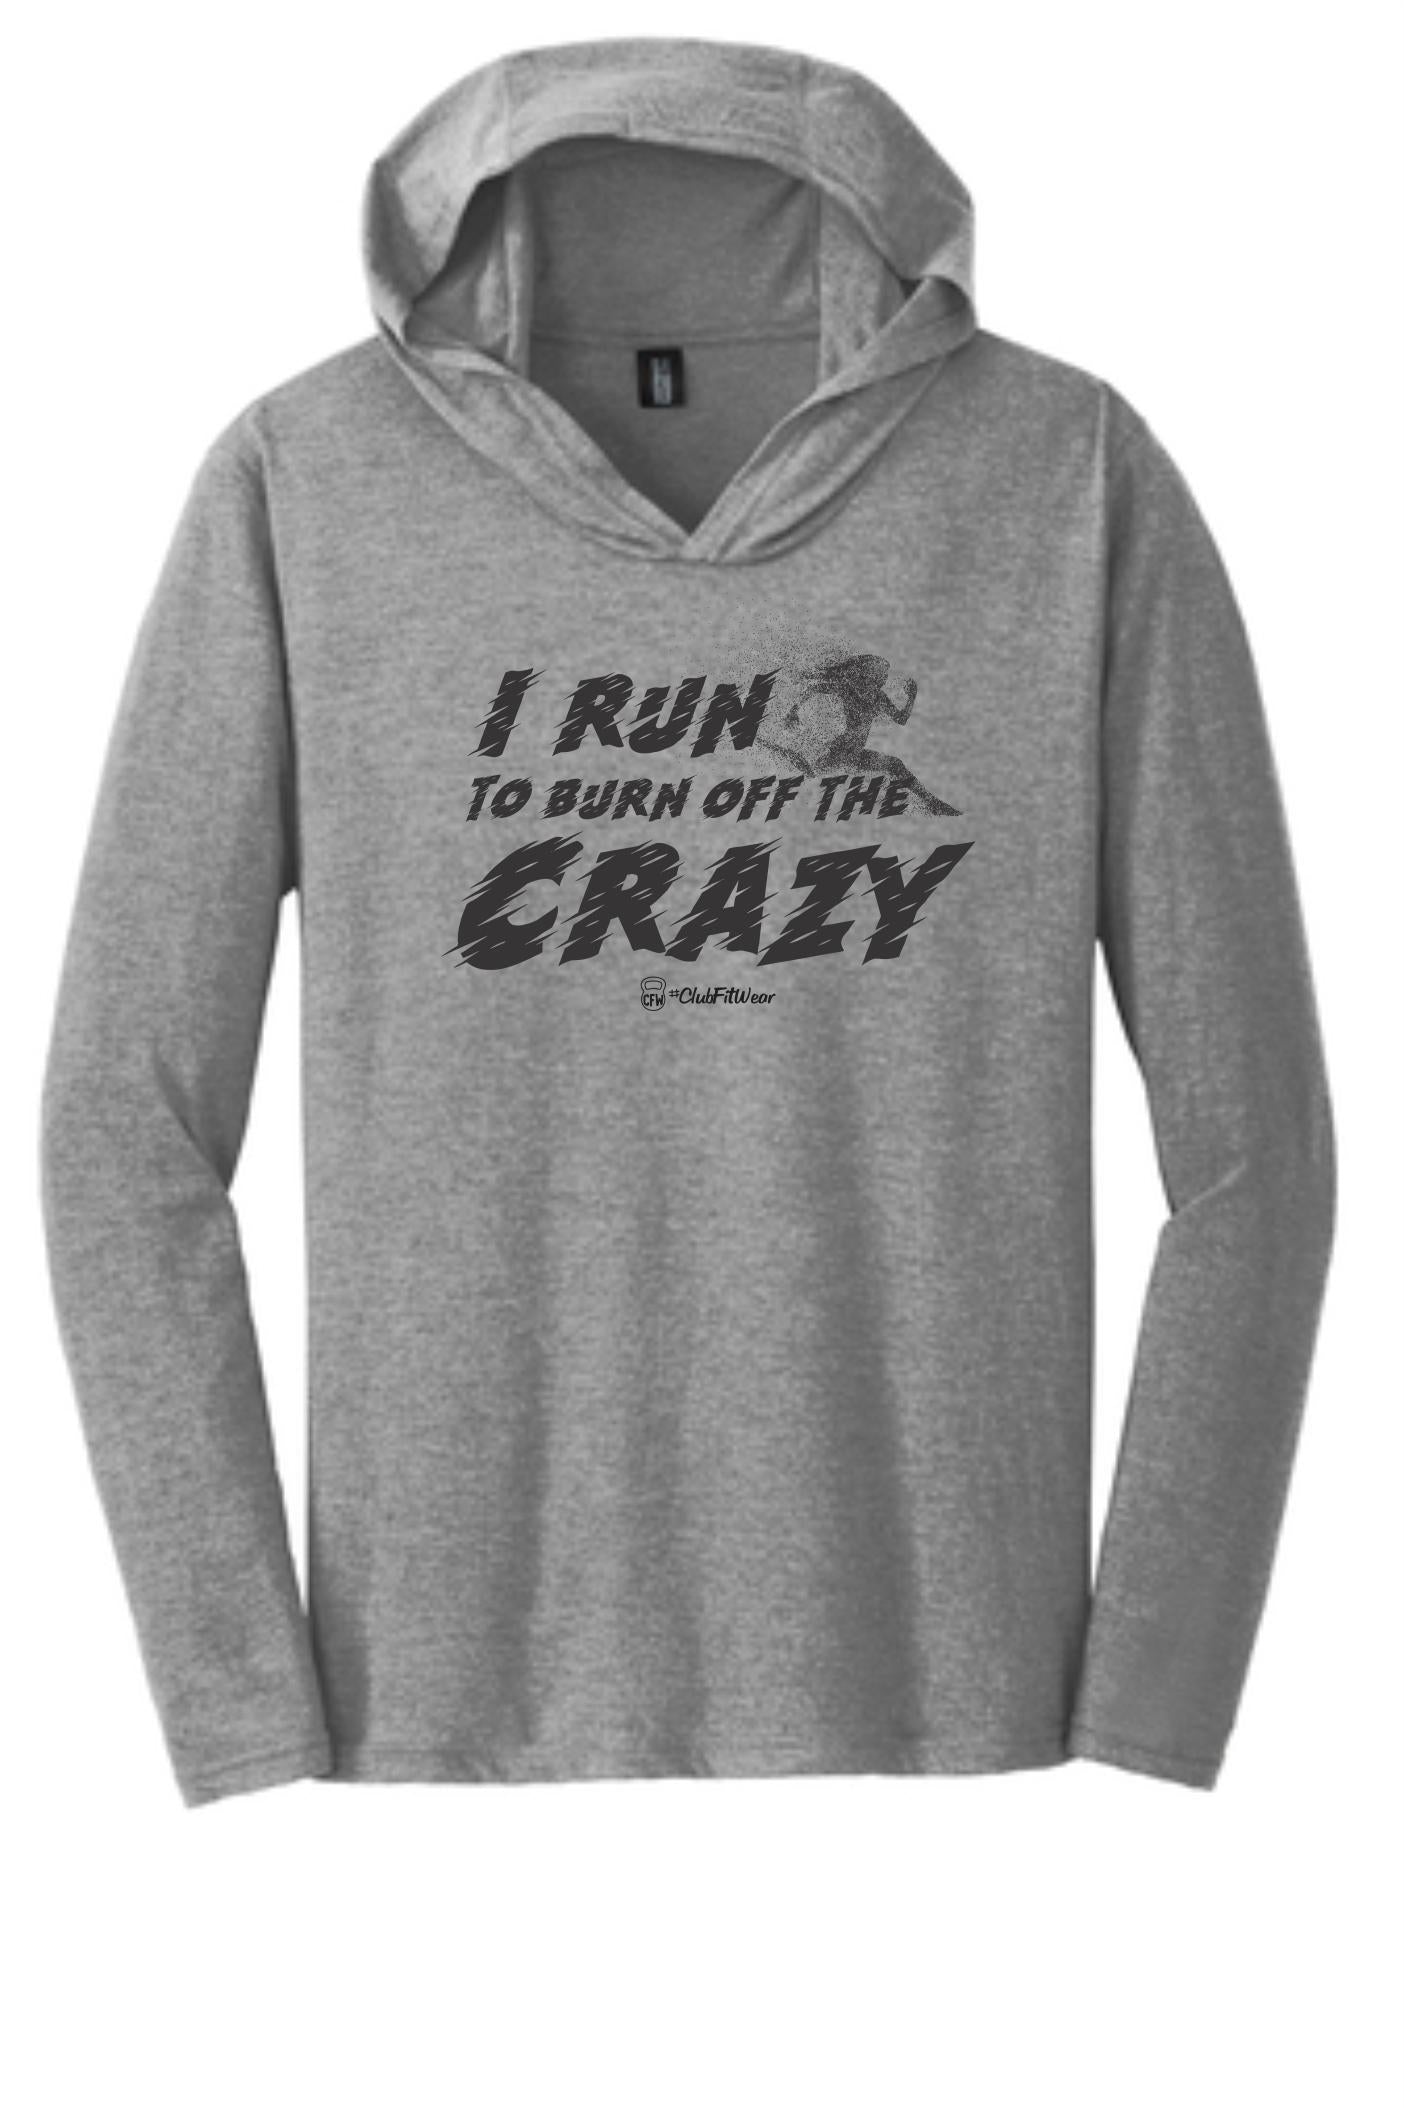 I Run to Burn Off the Crazy - Unisex Hooded Pullover